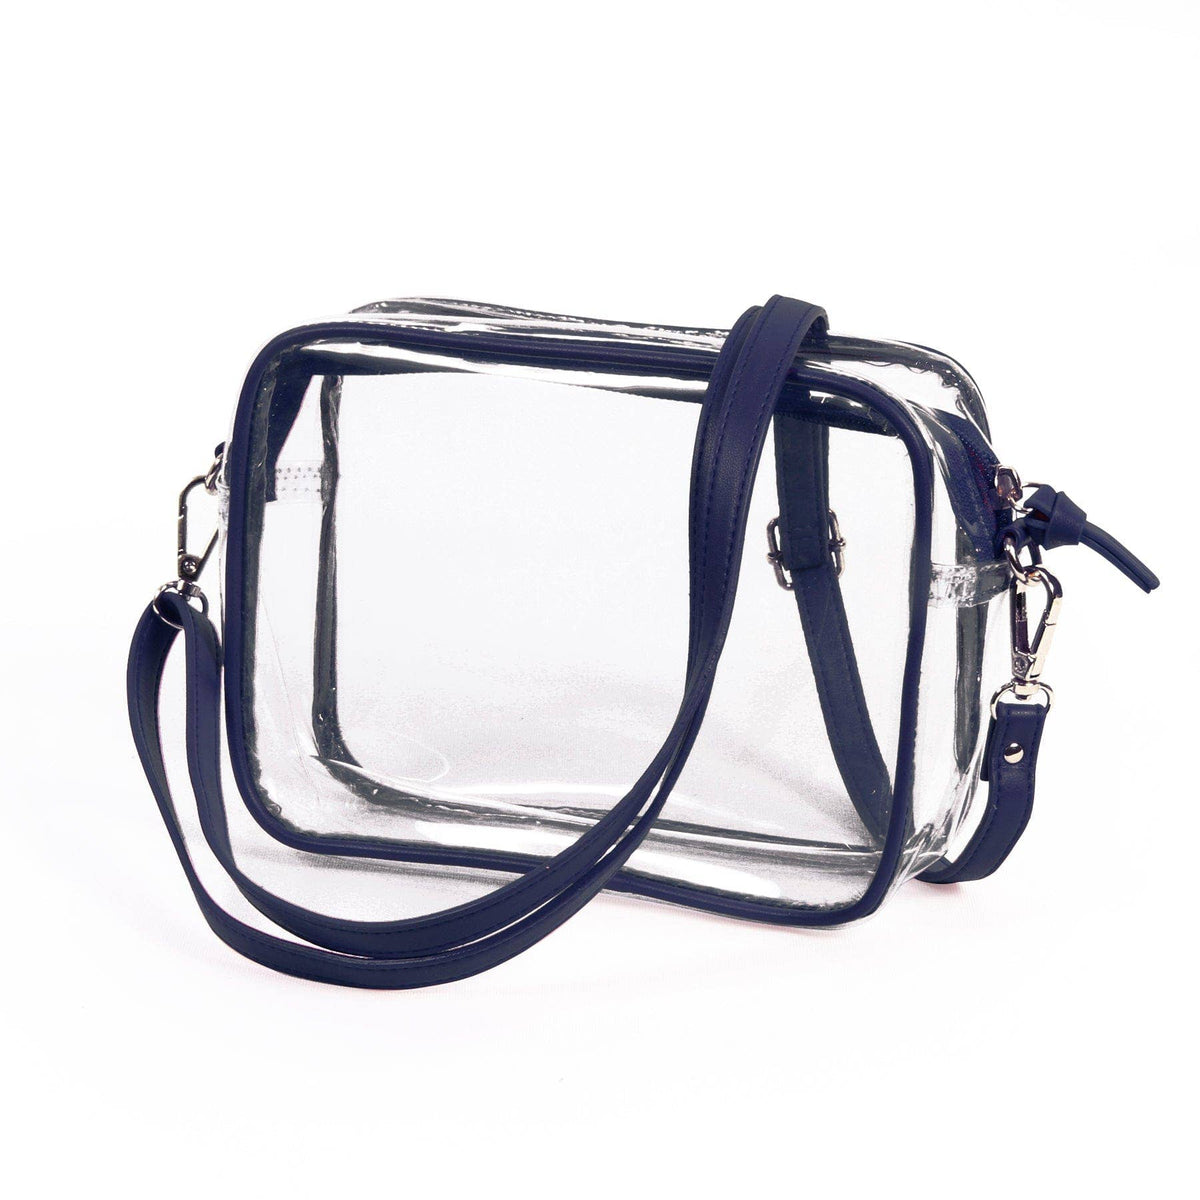 Bridget Clear Purse with Vegan Leather Trim and Straps